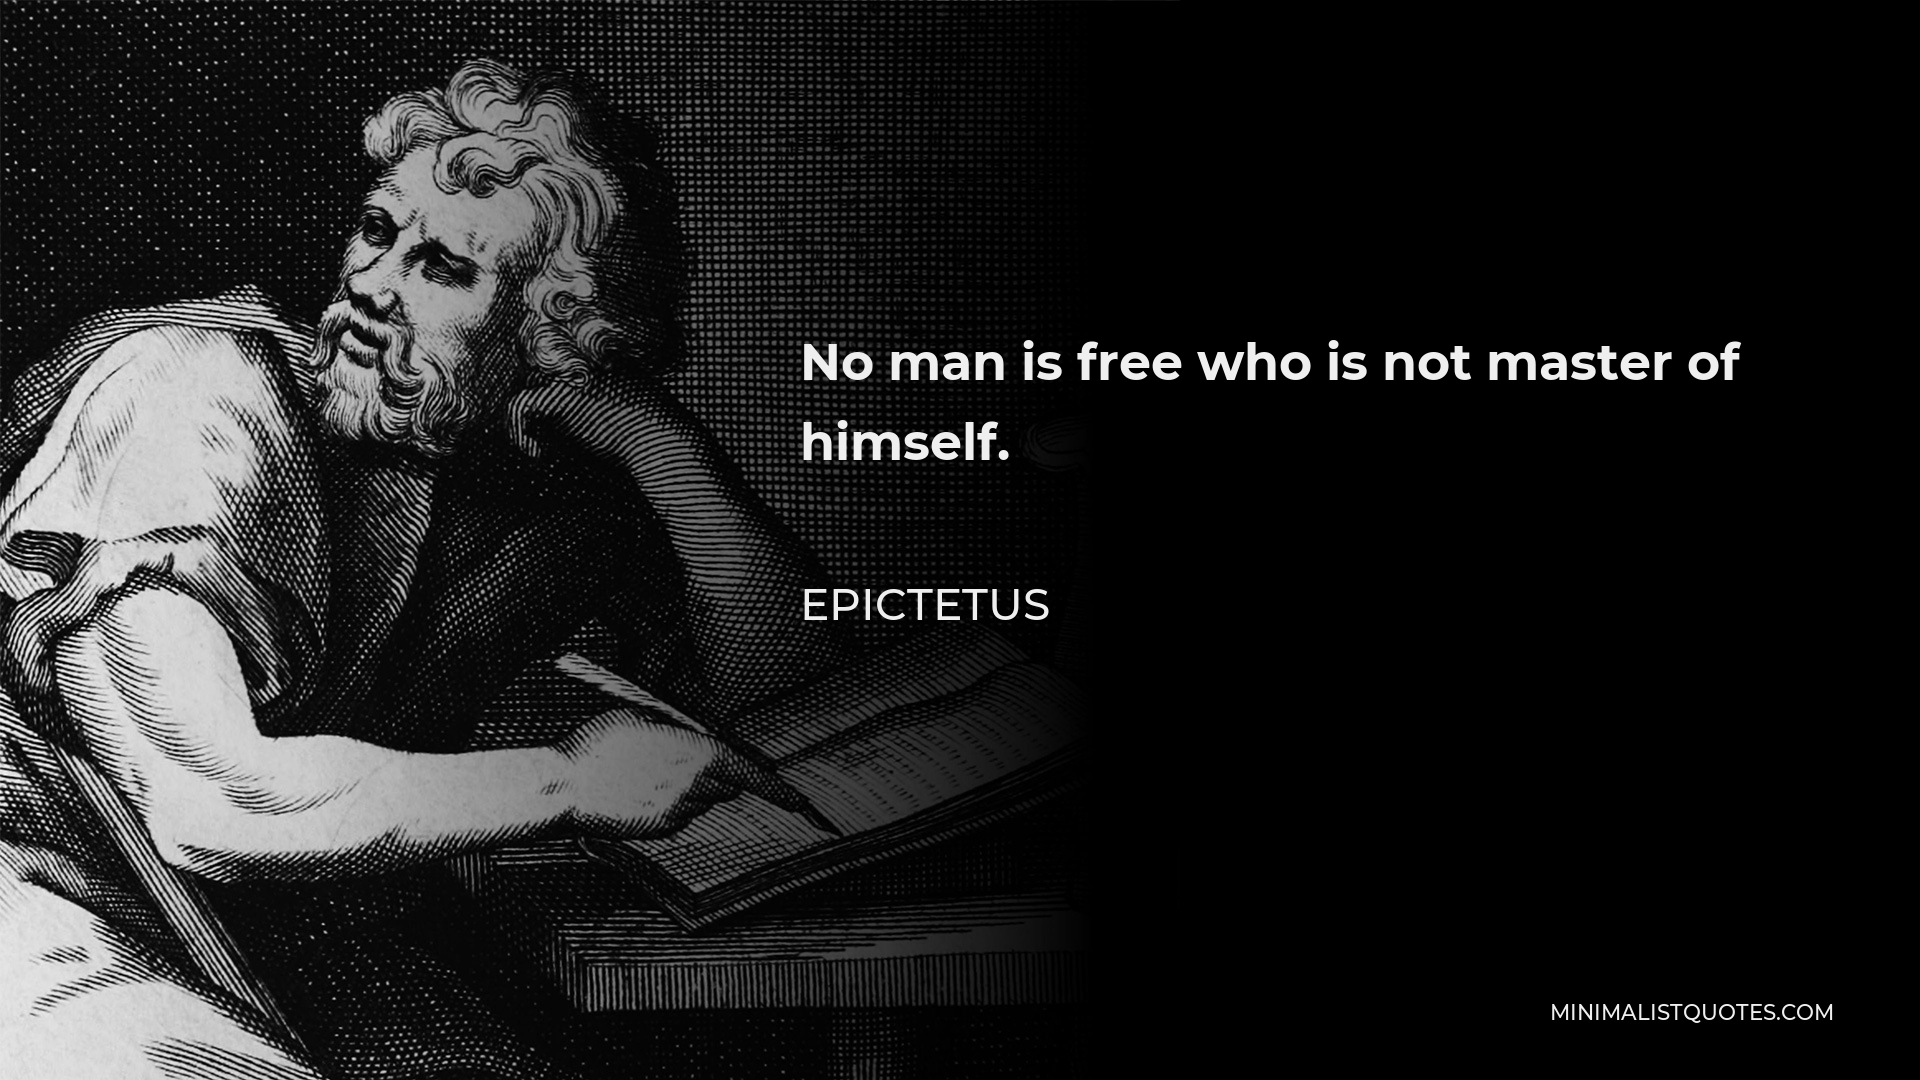 Epictetus Quote - No man is free who is not master of himself.